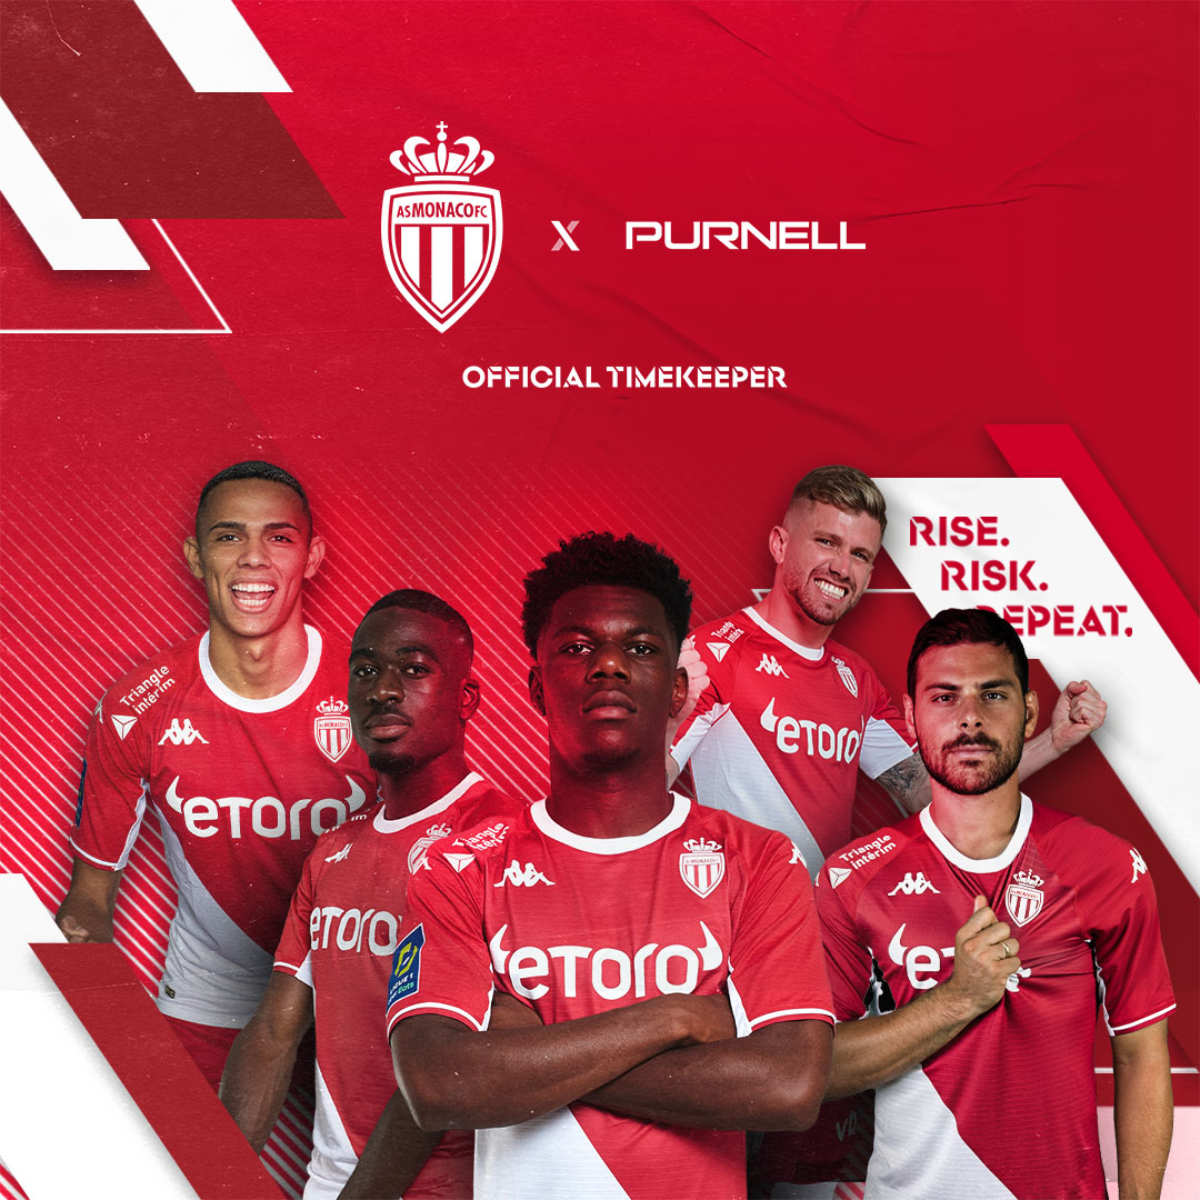 Purnell As The Official Timekeeper For AS Monaco